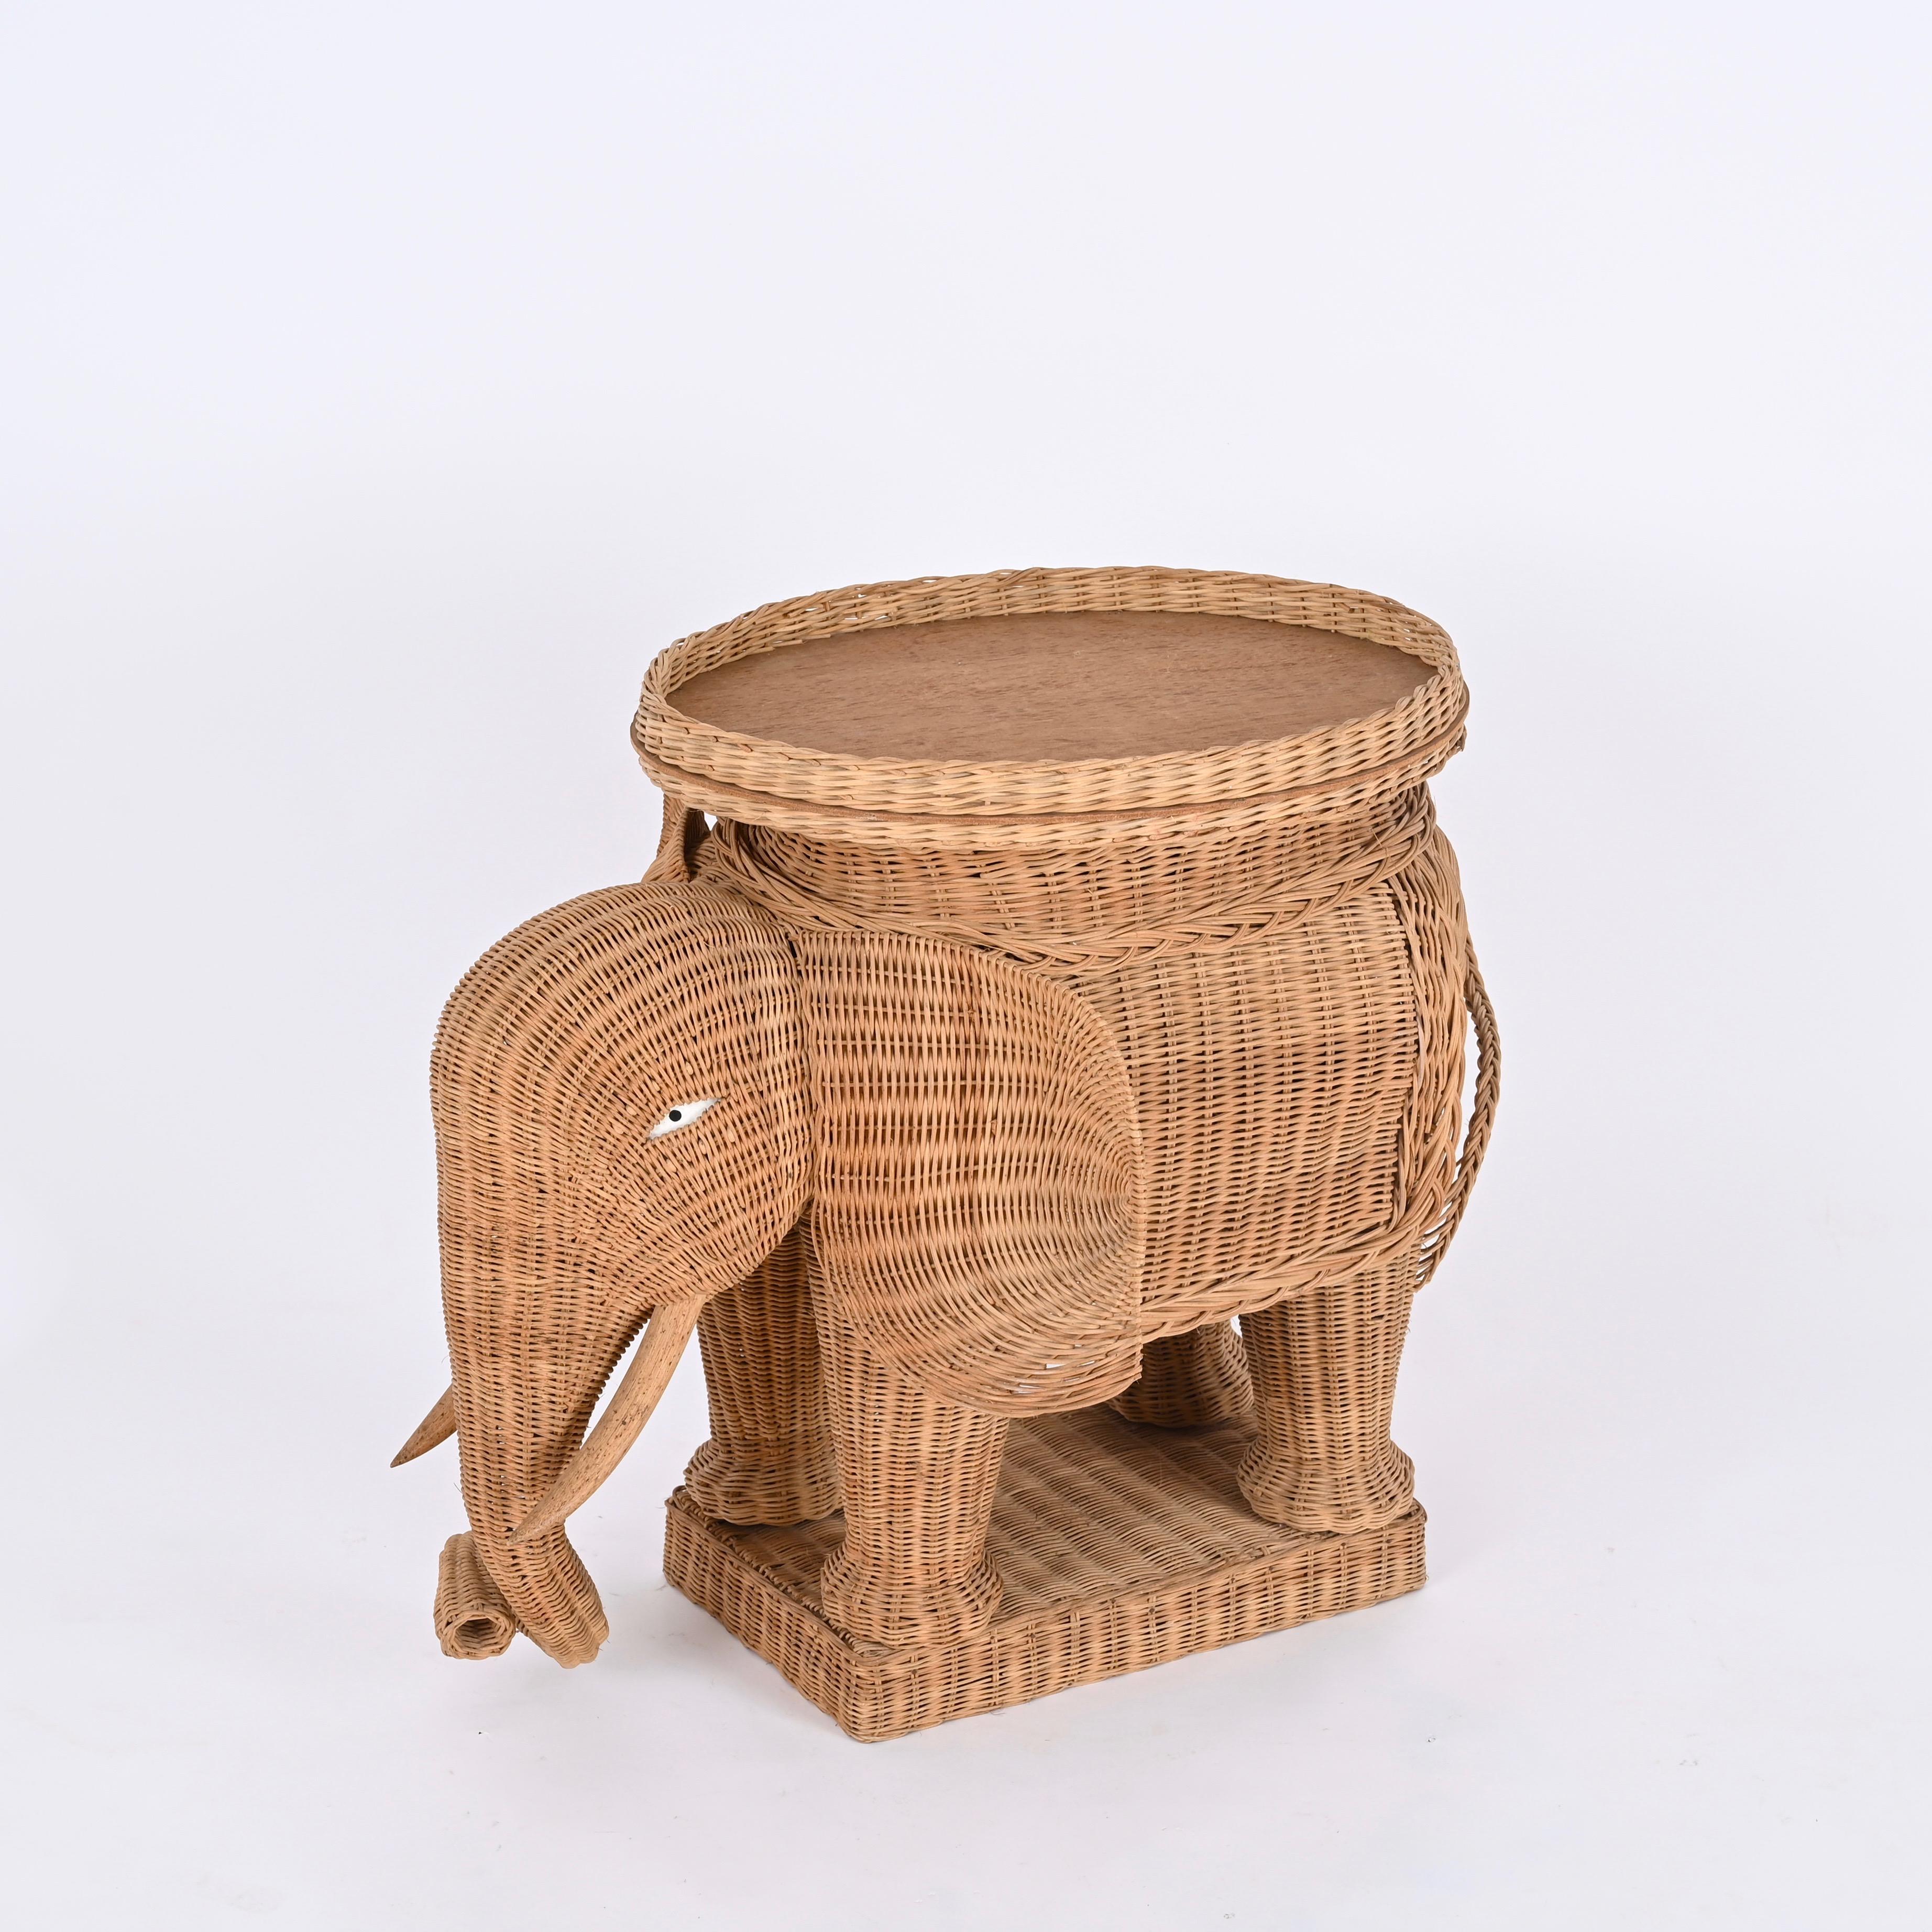 Italian Large Rattan and Wicker Elephant Side Table by Vivai del Sud, Italy 1970s